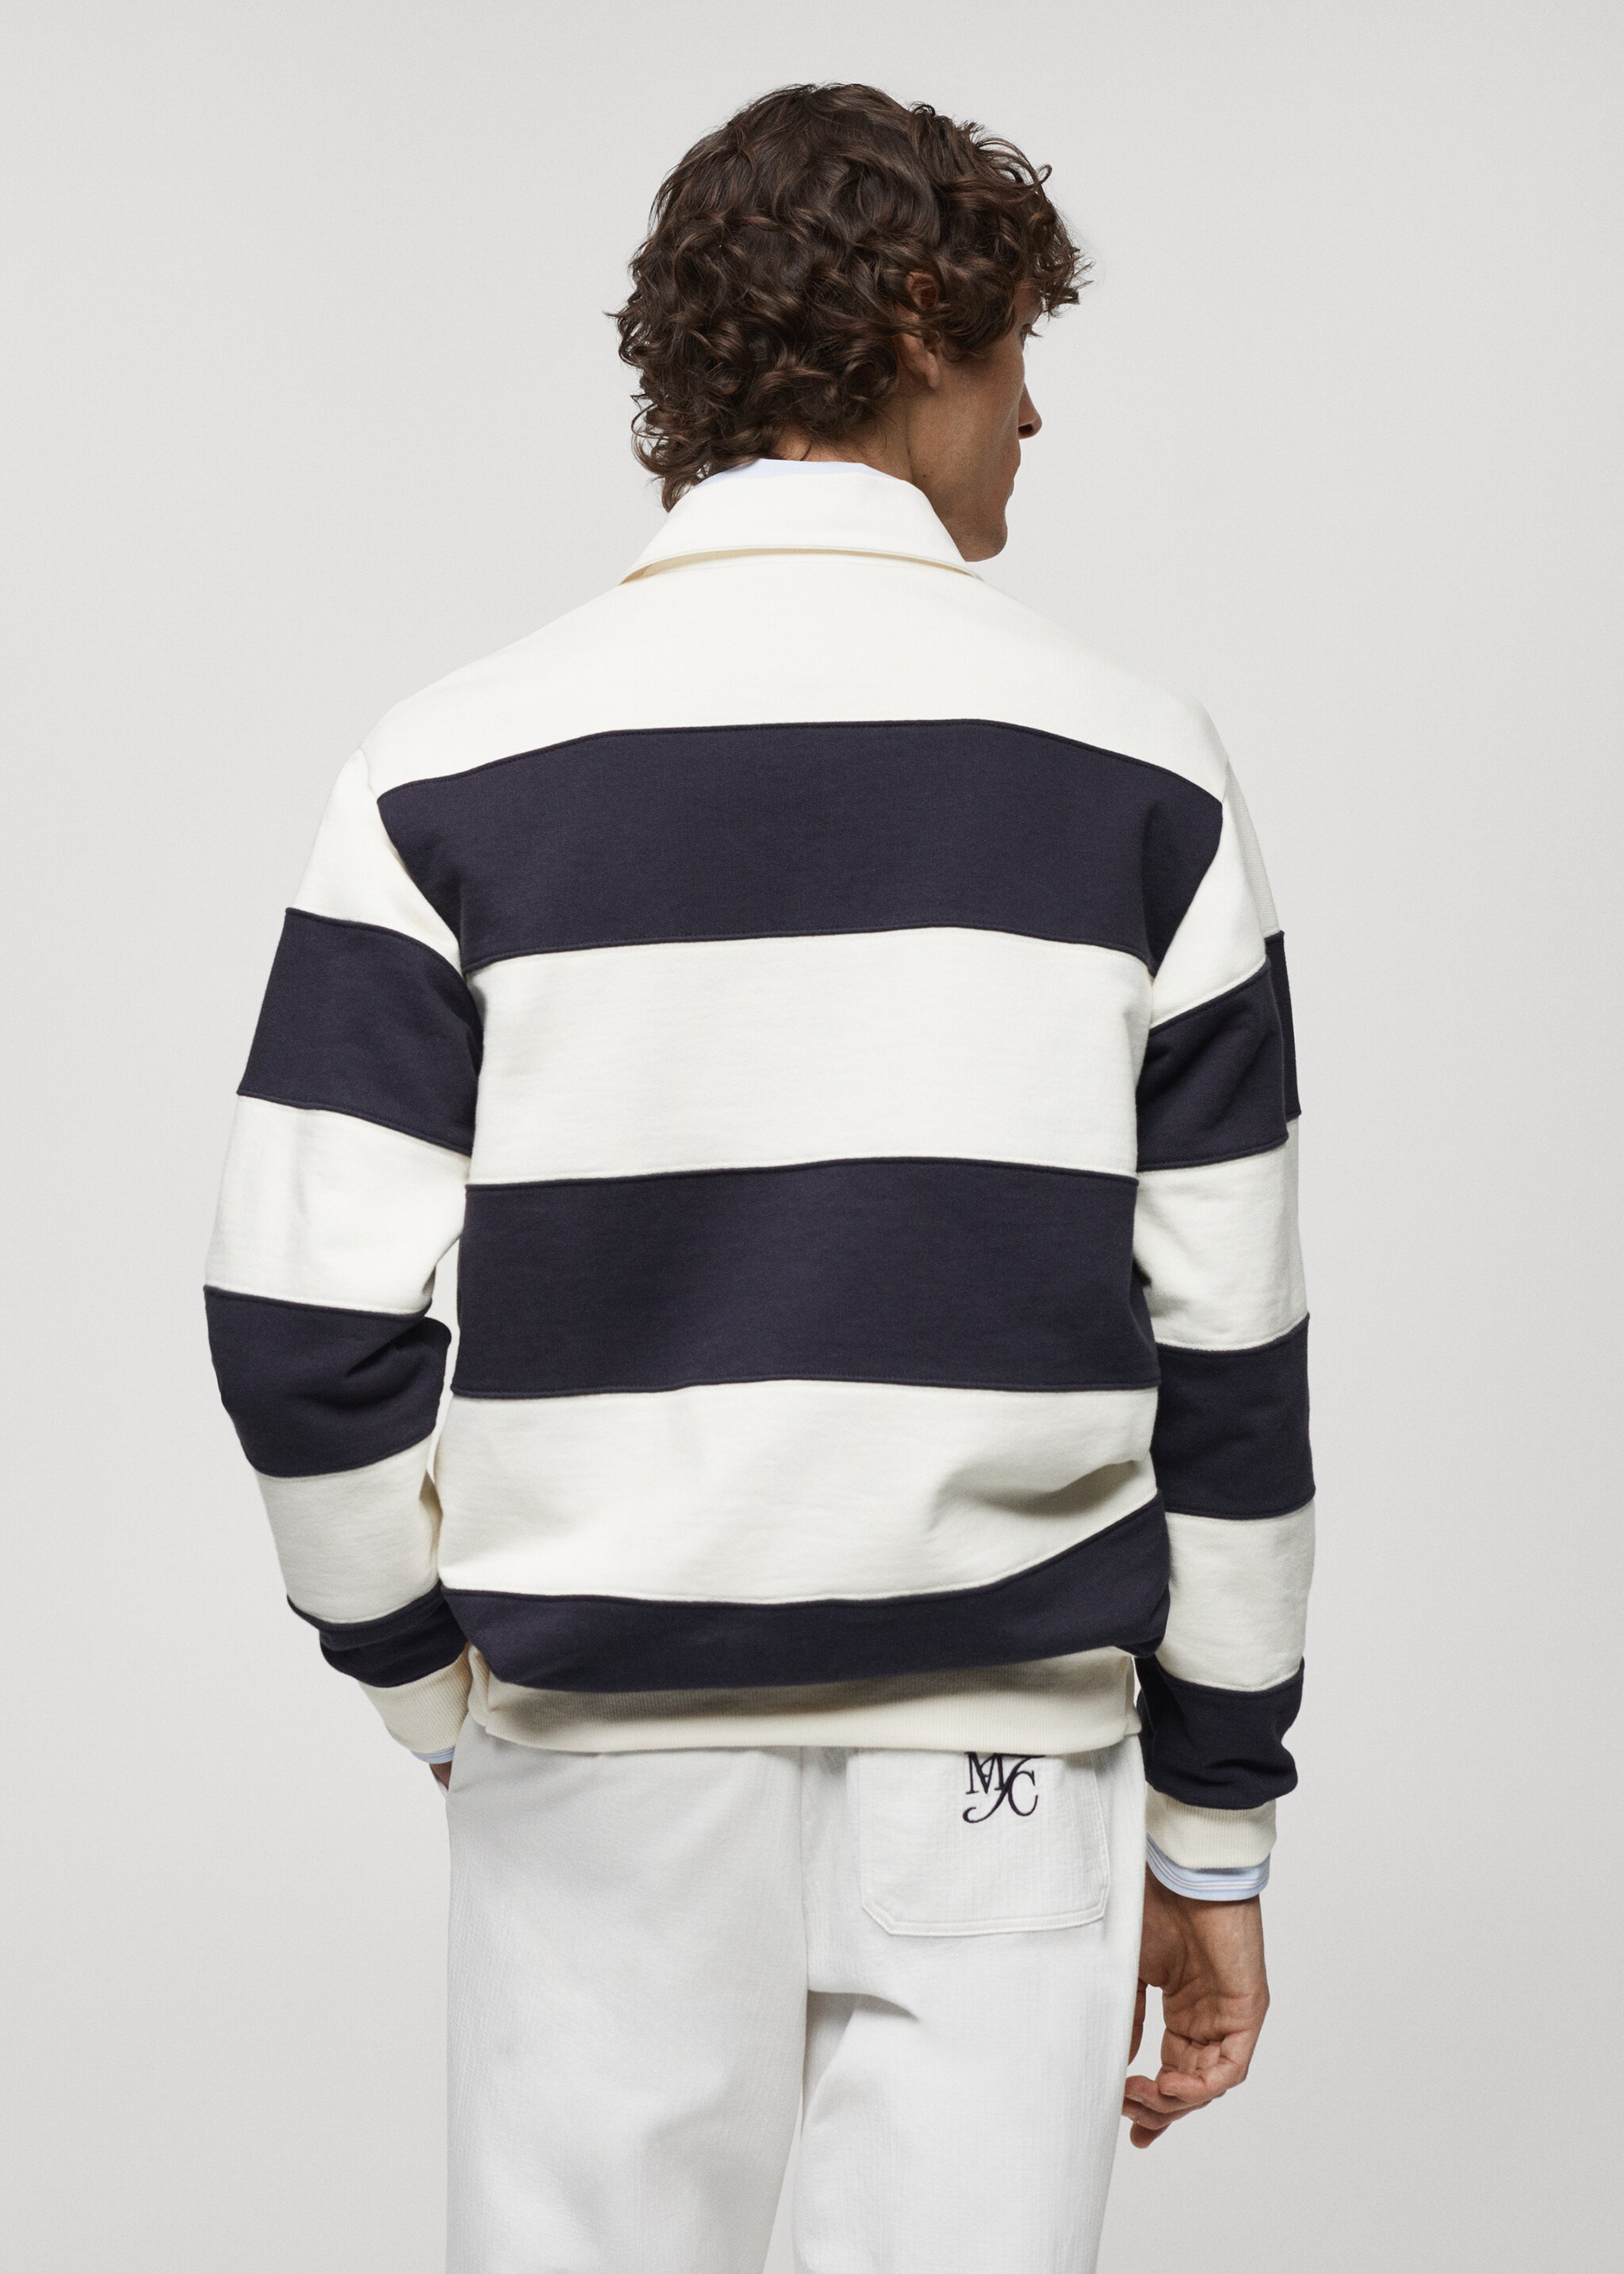 Sweat-shirt polo rayures broderie - Verso de l’article